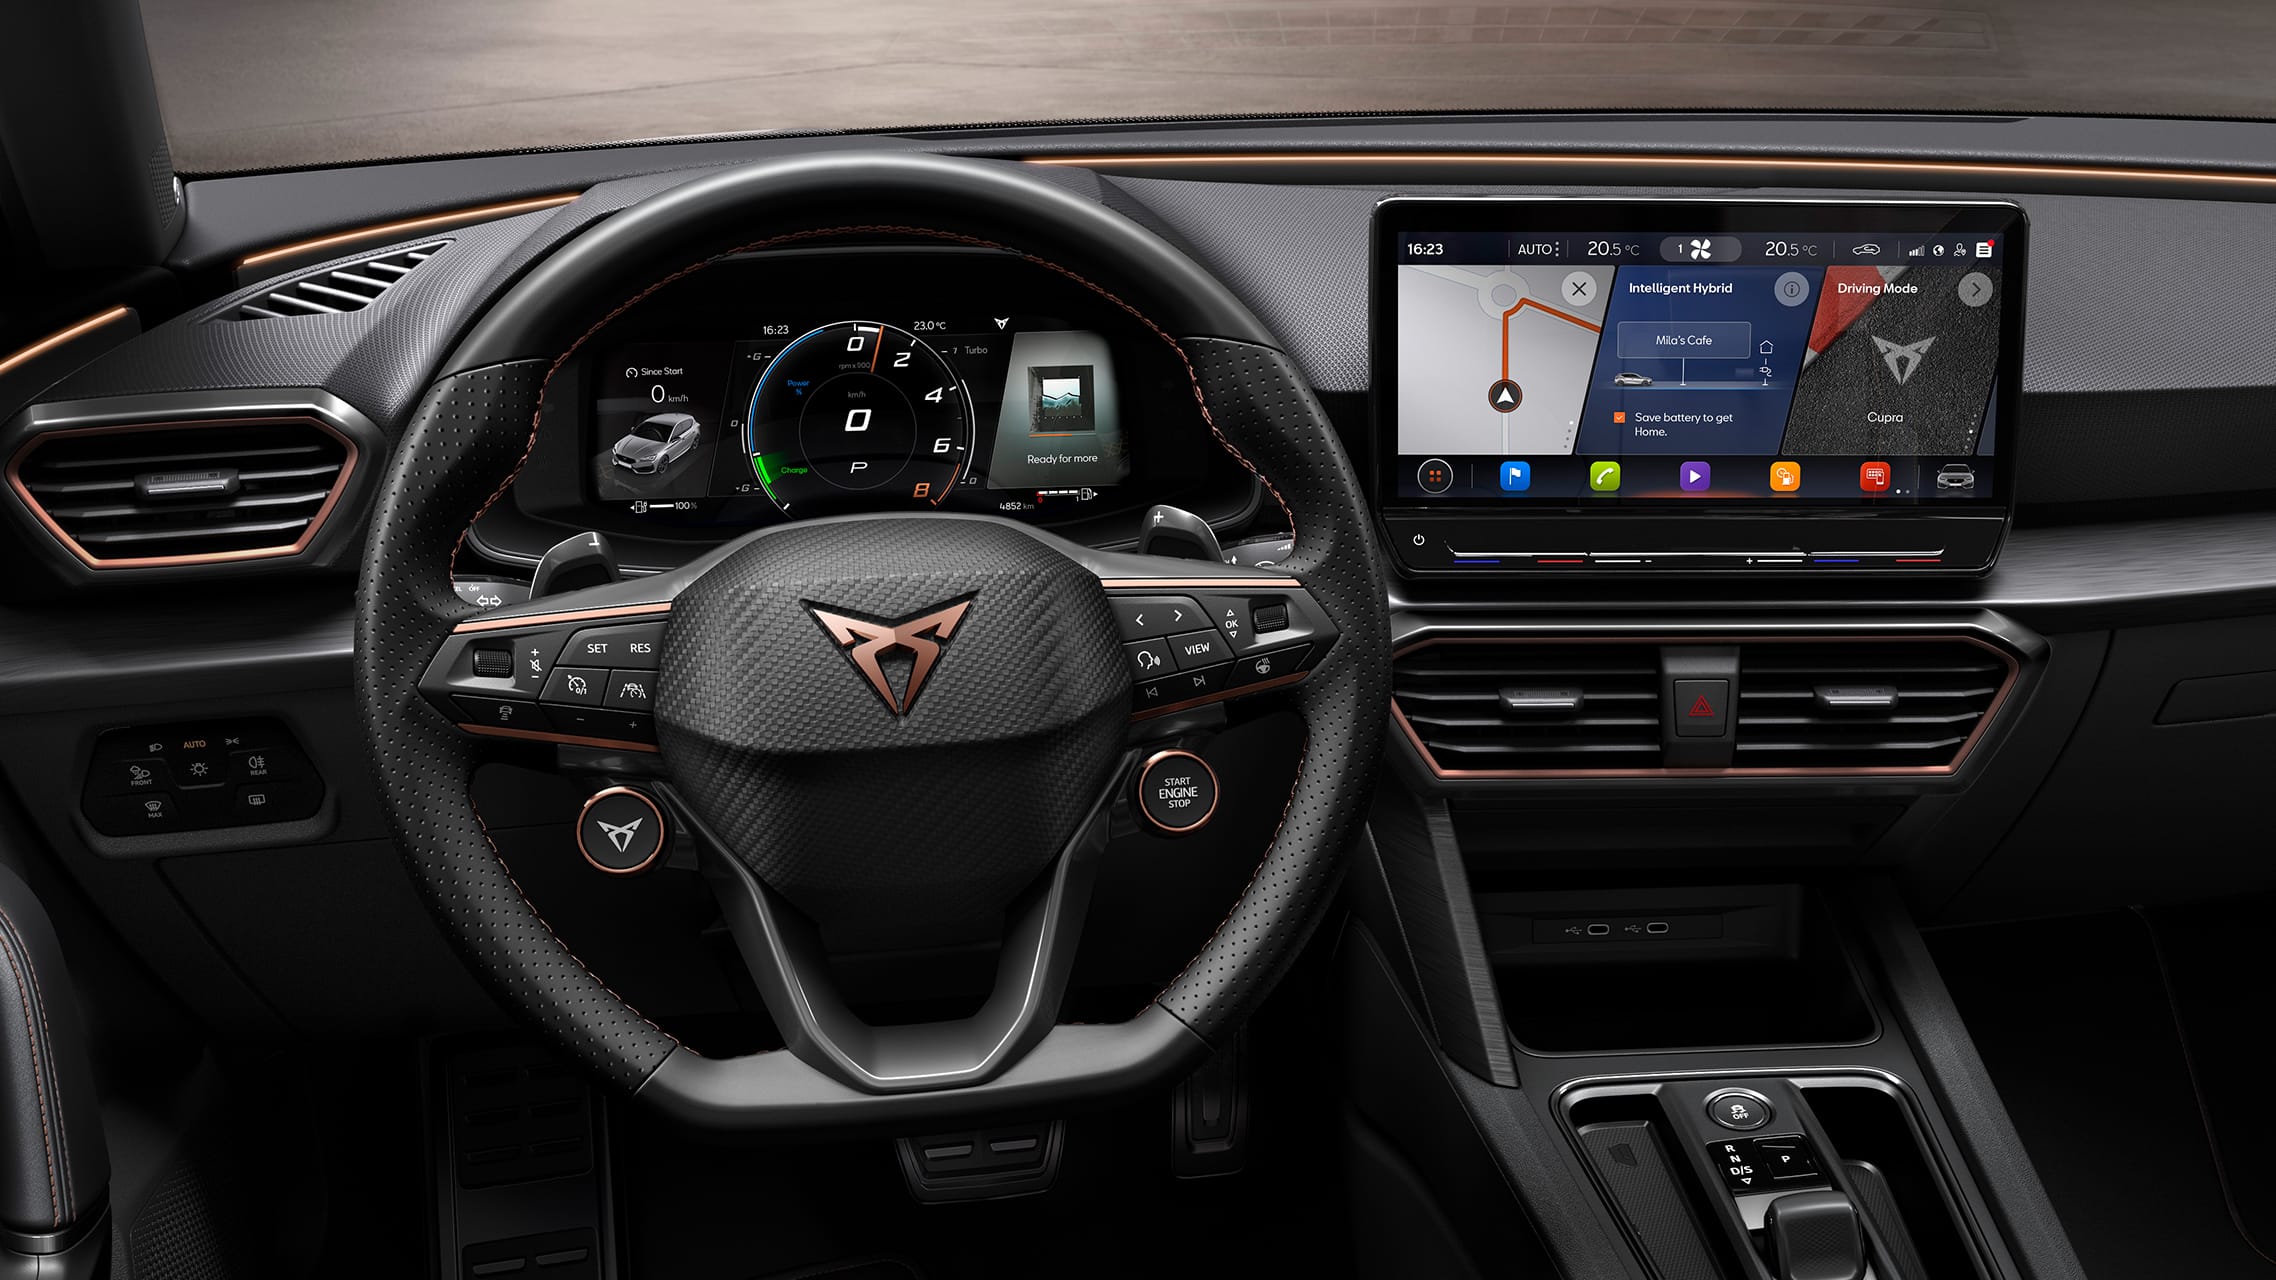 https://www.cupraofficial.ch/content/dam/public/cupra-website/cars/cupra-range/leon/overview/content-box-components-features-interior-design/x-large/new-cupra-leon-ehybrid-compact-sports-car-interior-view-of-leather-steering-wheel-with-driving-profile-mode-button.jpg